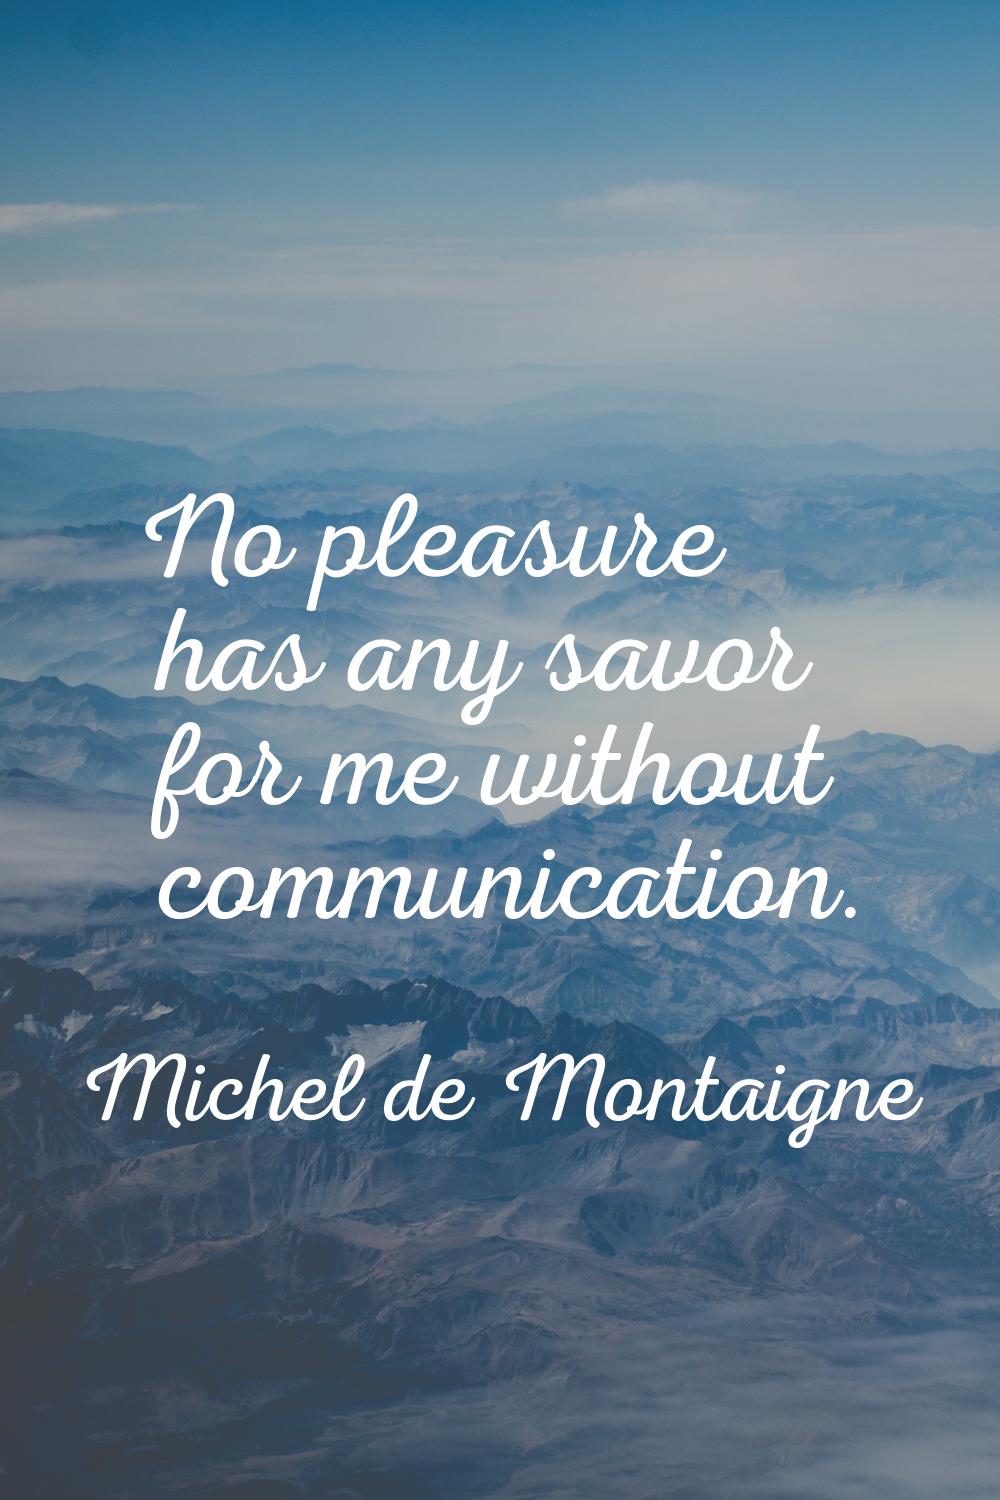 No pleasure has any savor for me without communication.